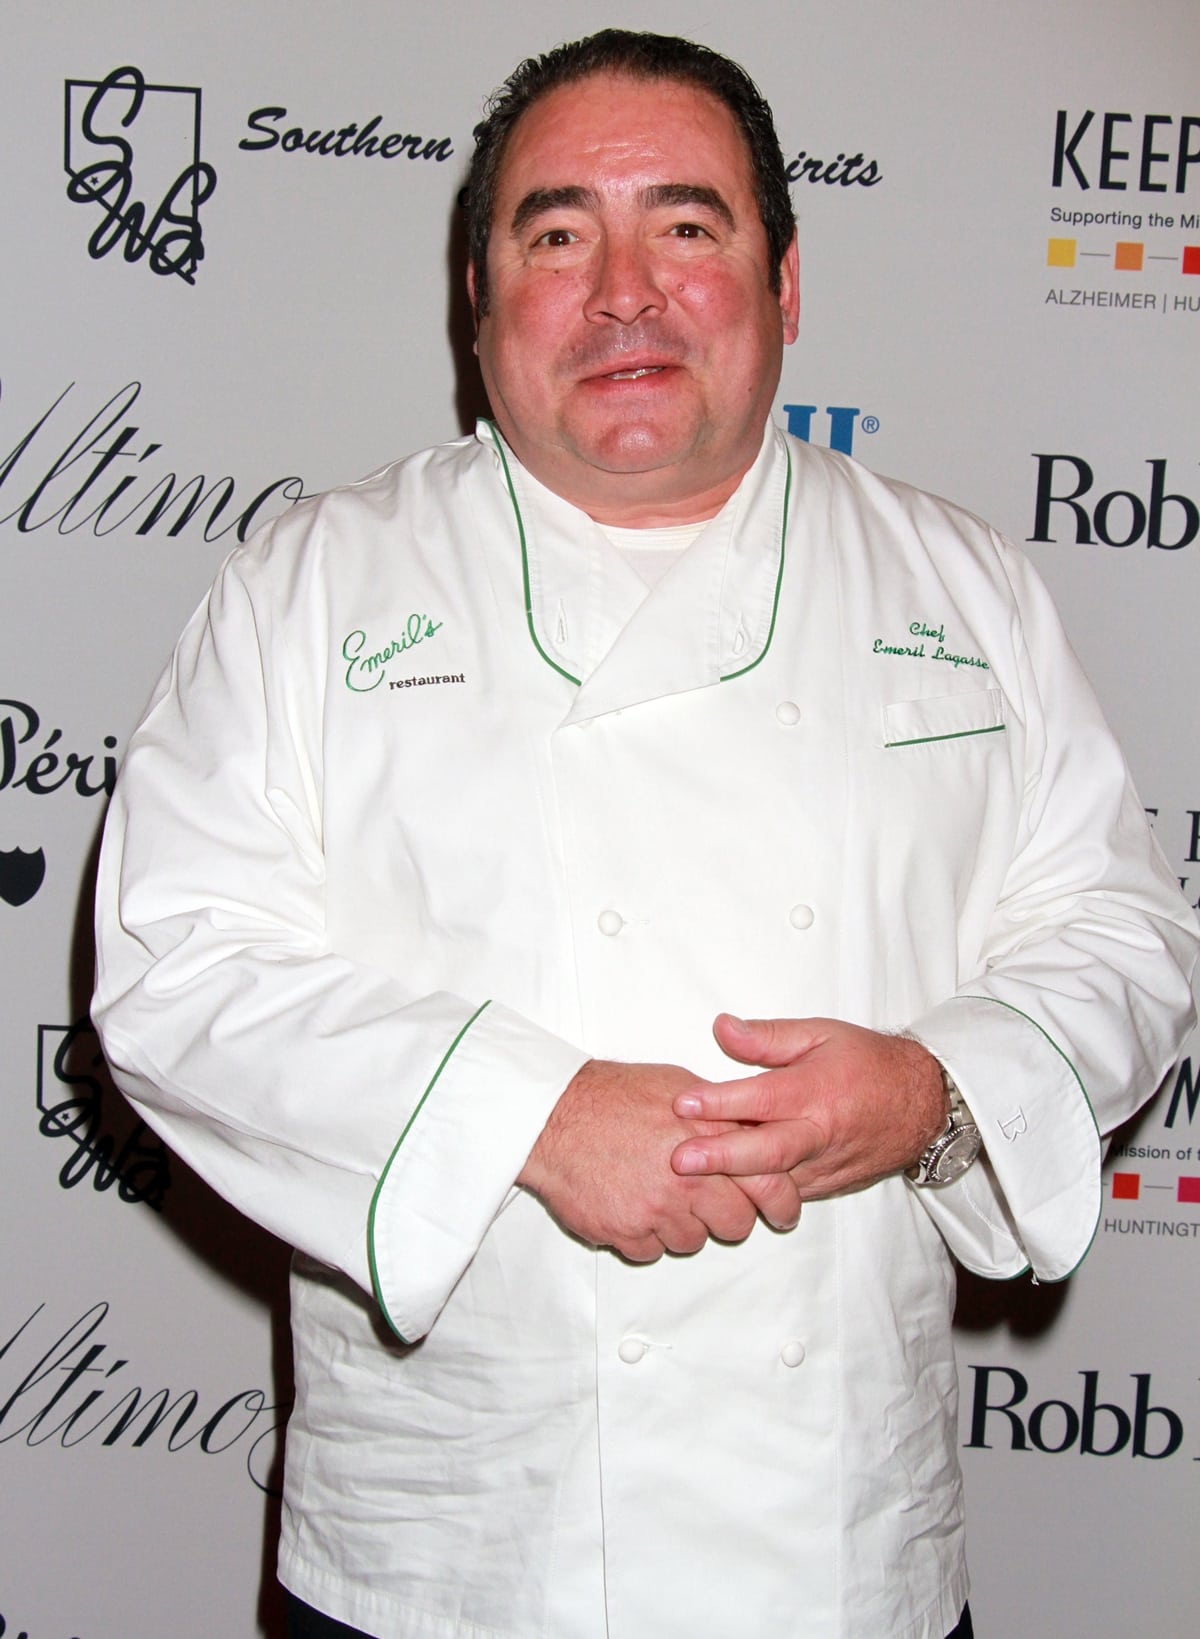 American restaurateur and television personality Emeril Lagasse is known for his mastery of Creole and Cajun cuisine